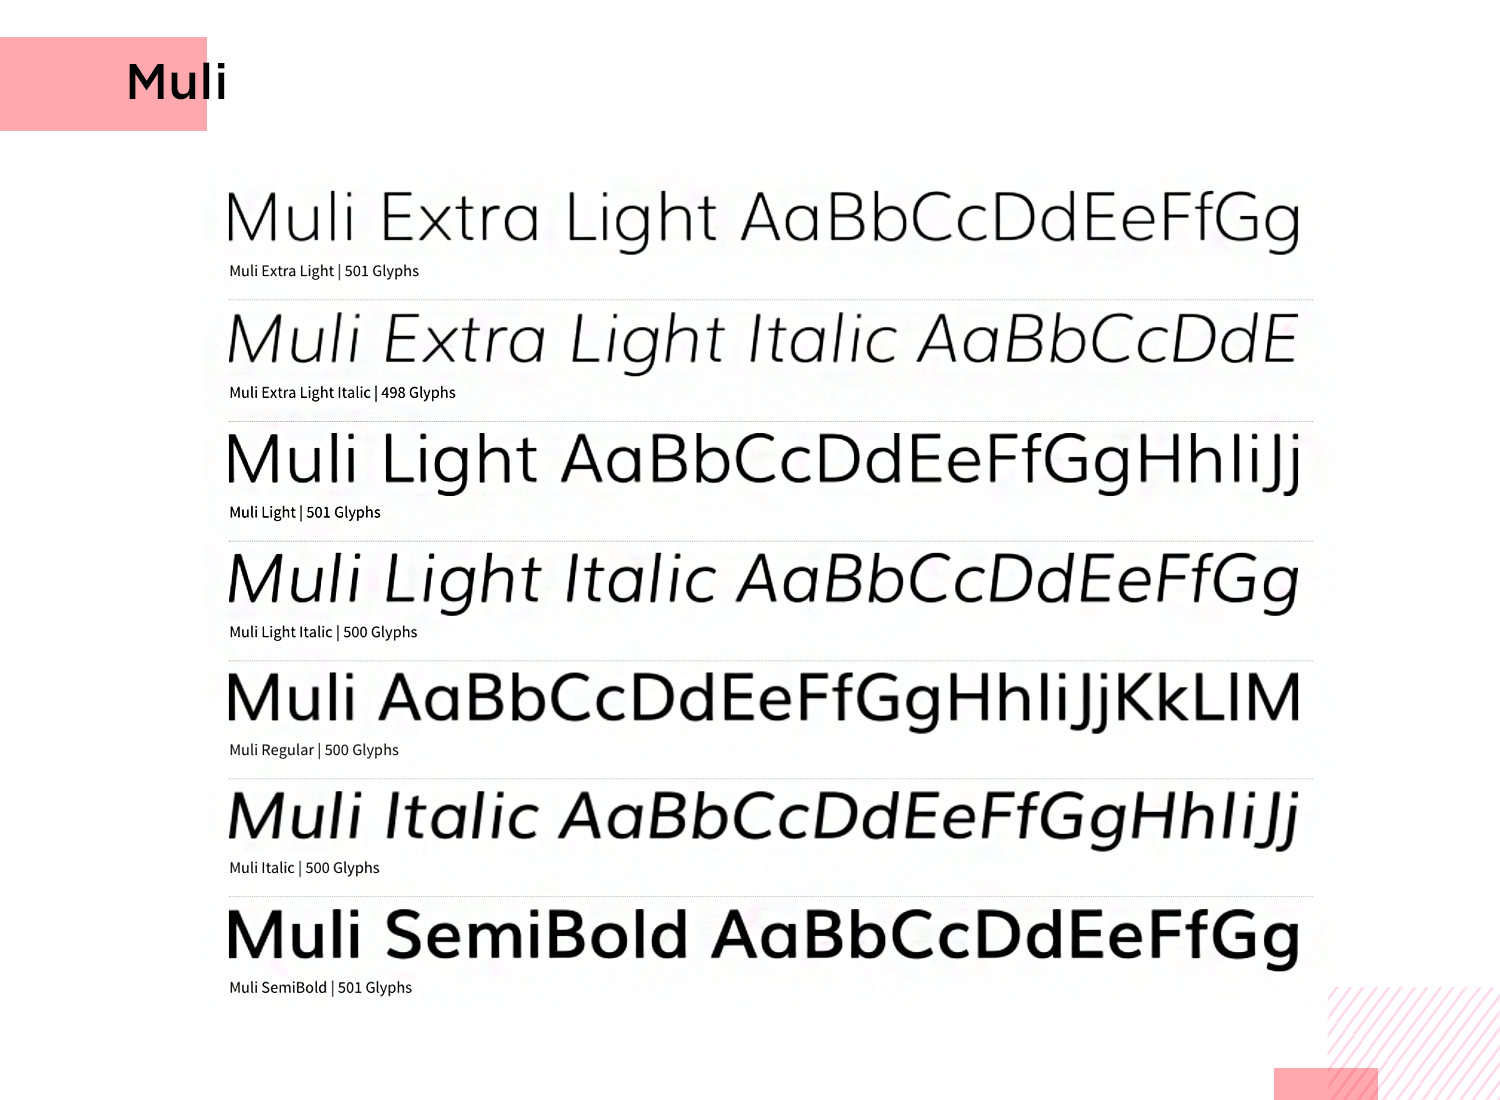 Muli font variations in bold, italic, regular, and book styles